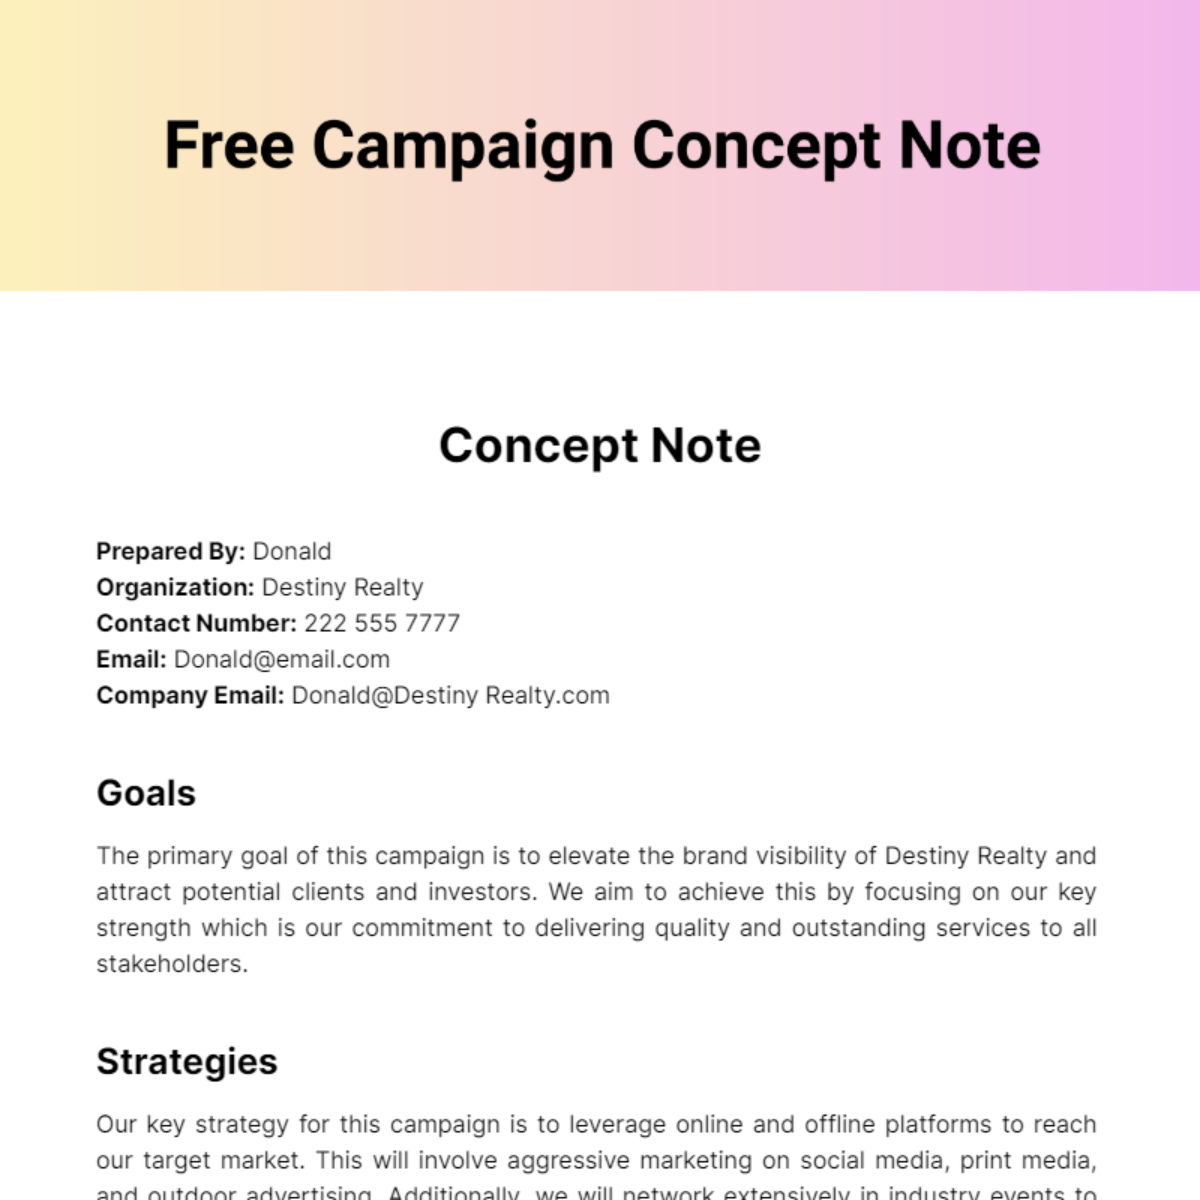 Free Campaign Concept Note Template